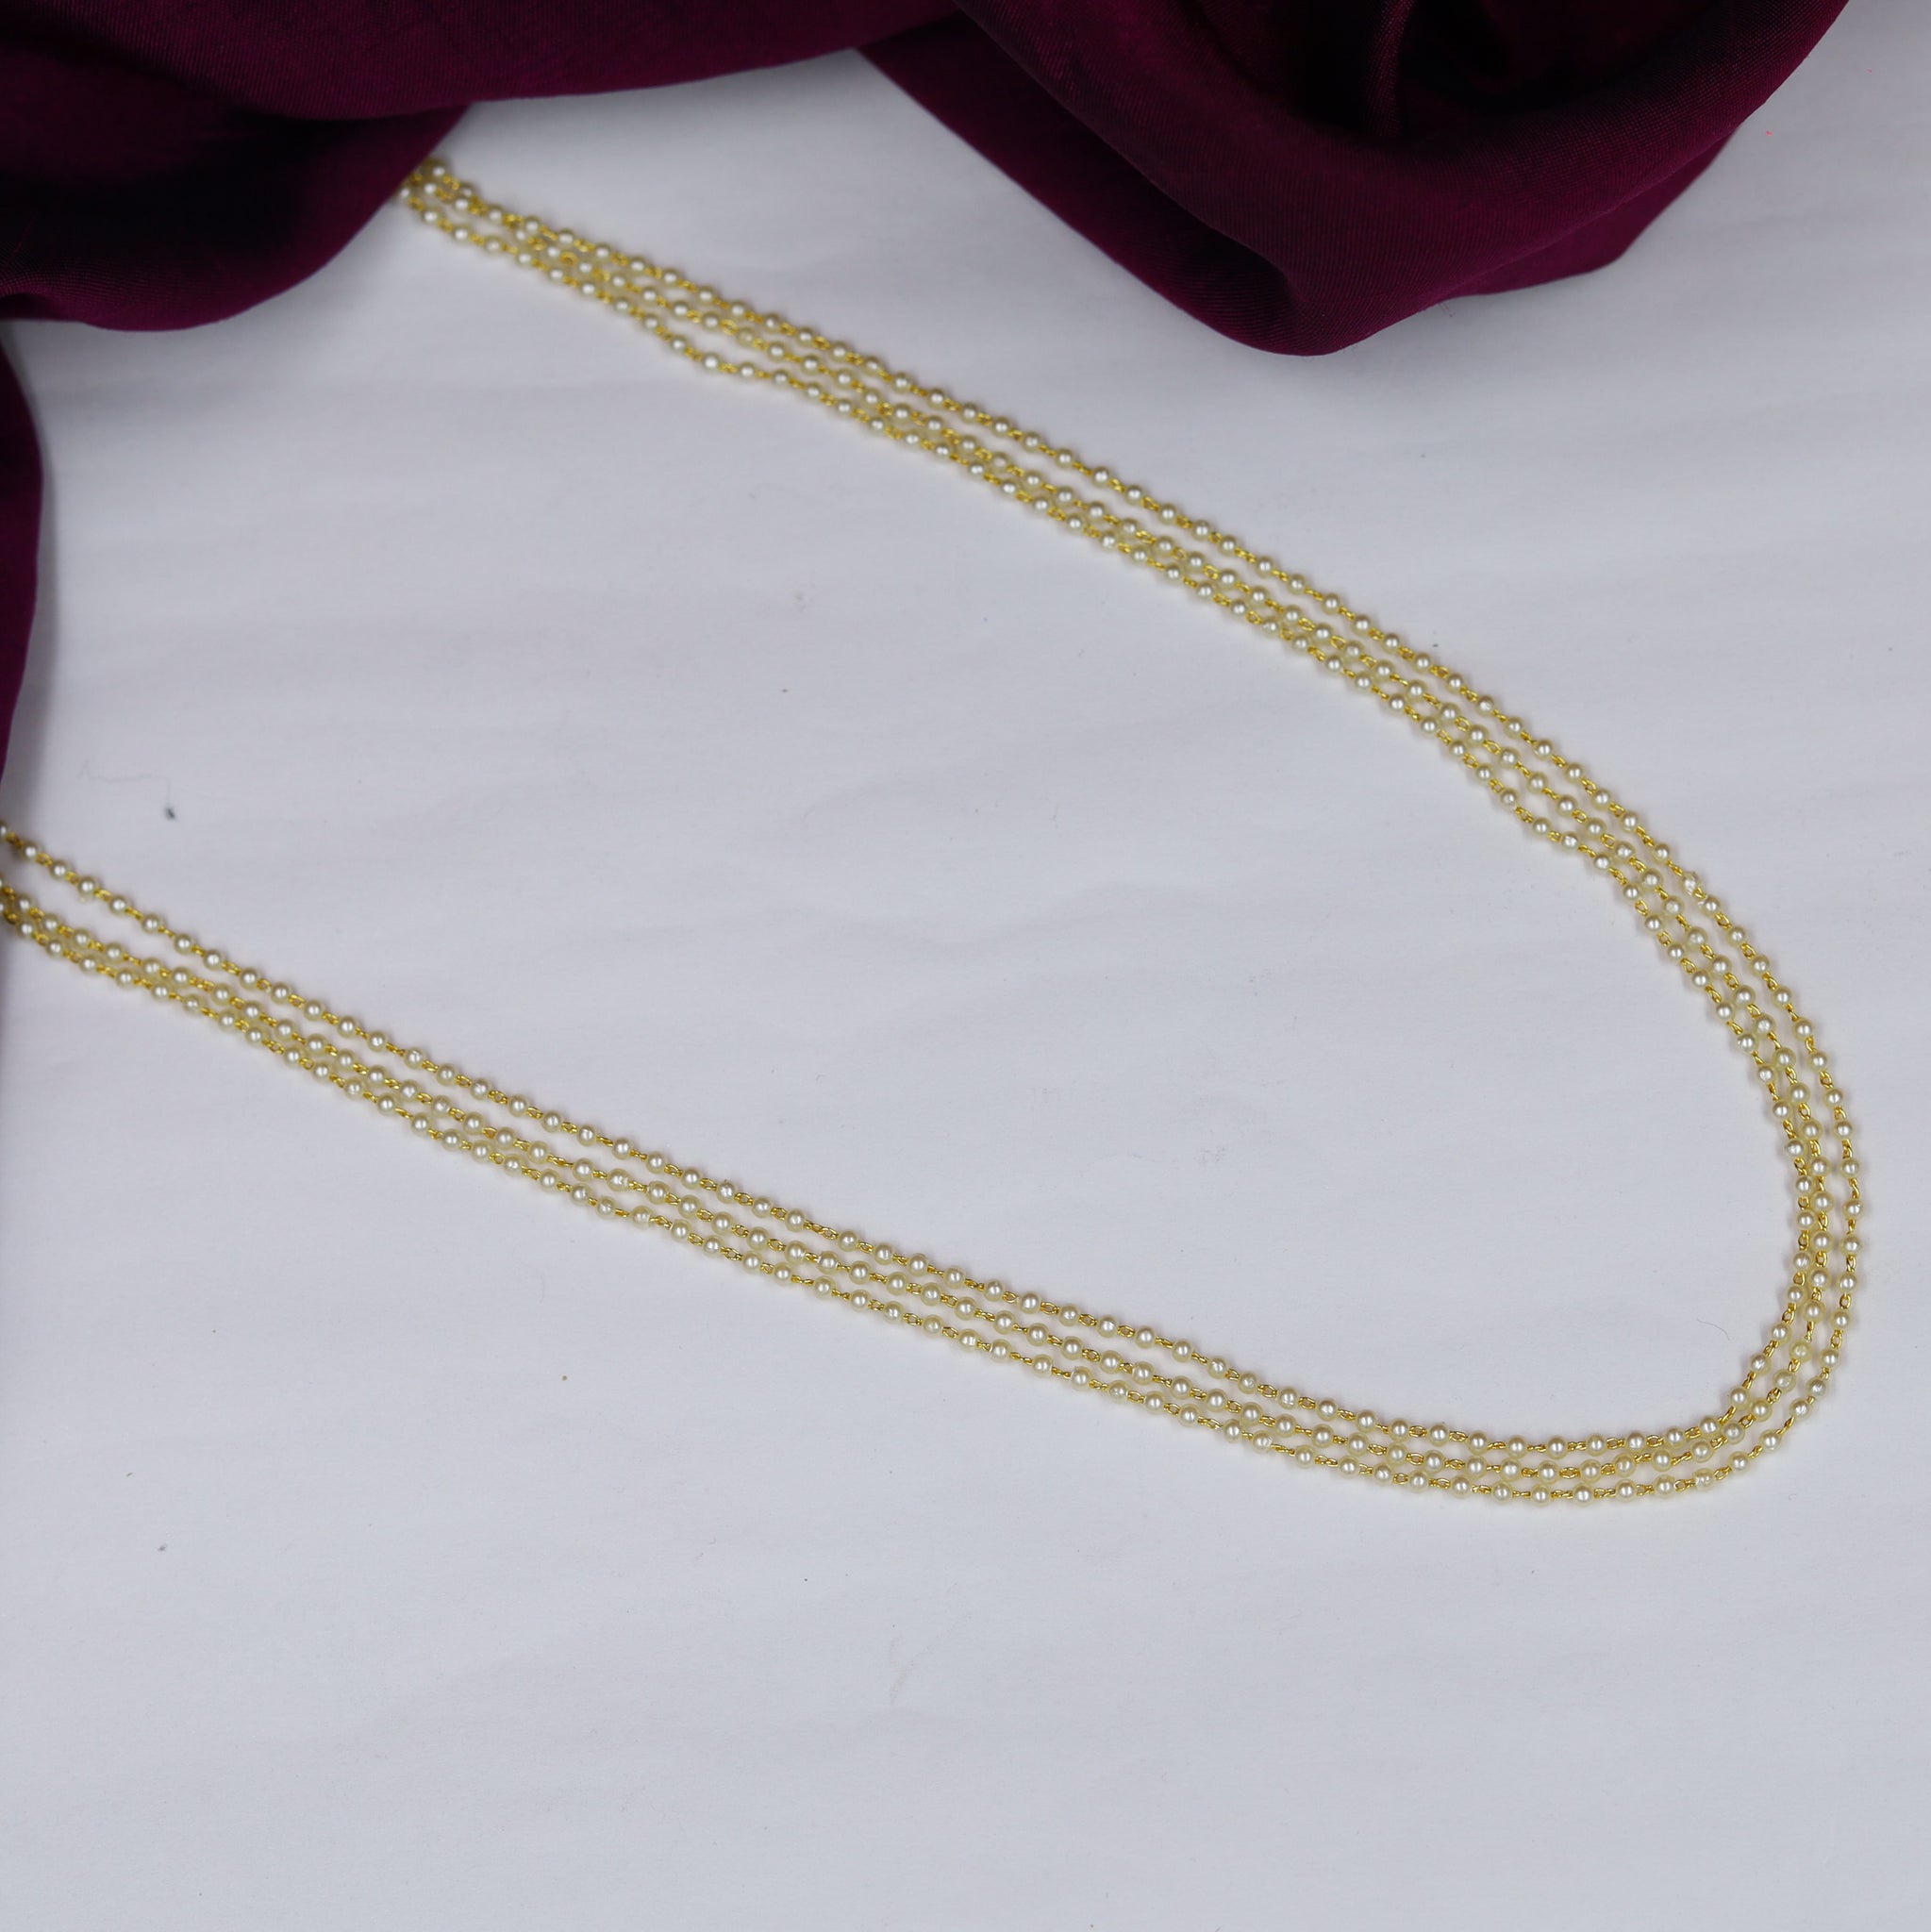 Gold Plated Pearl Necklace Set 13452-21